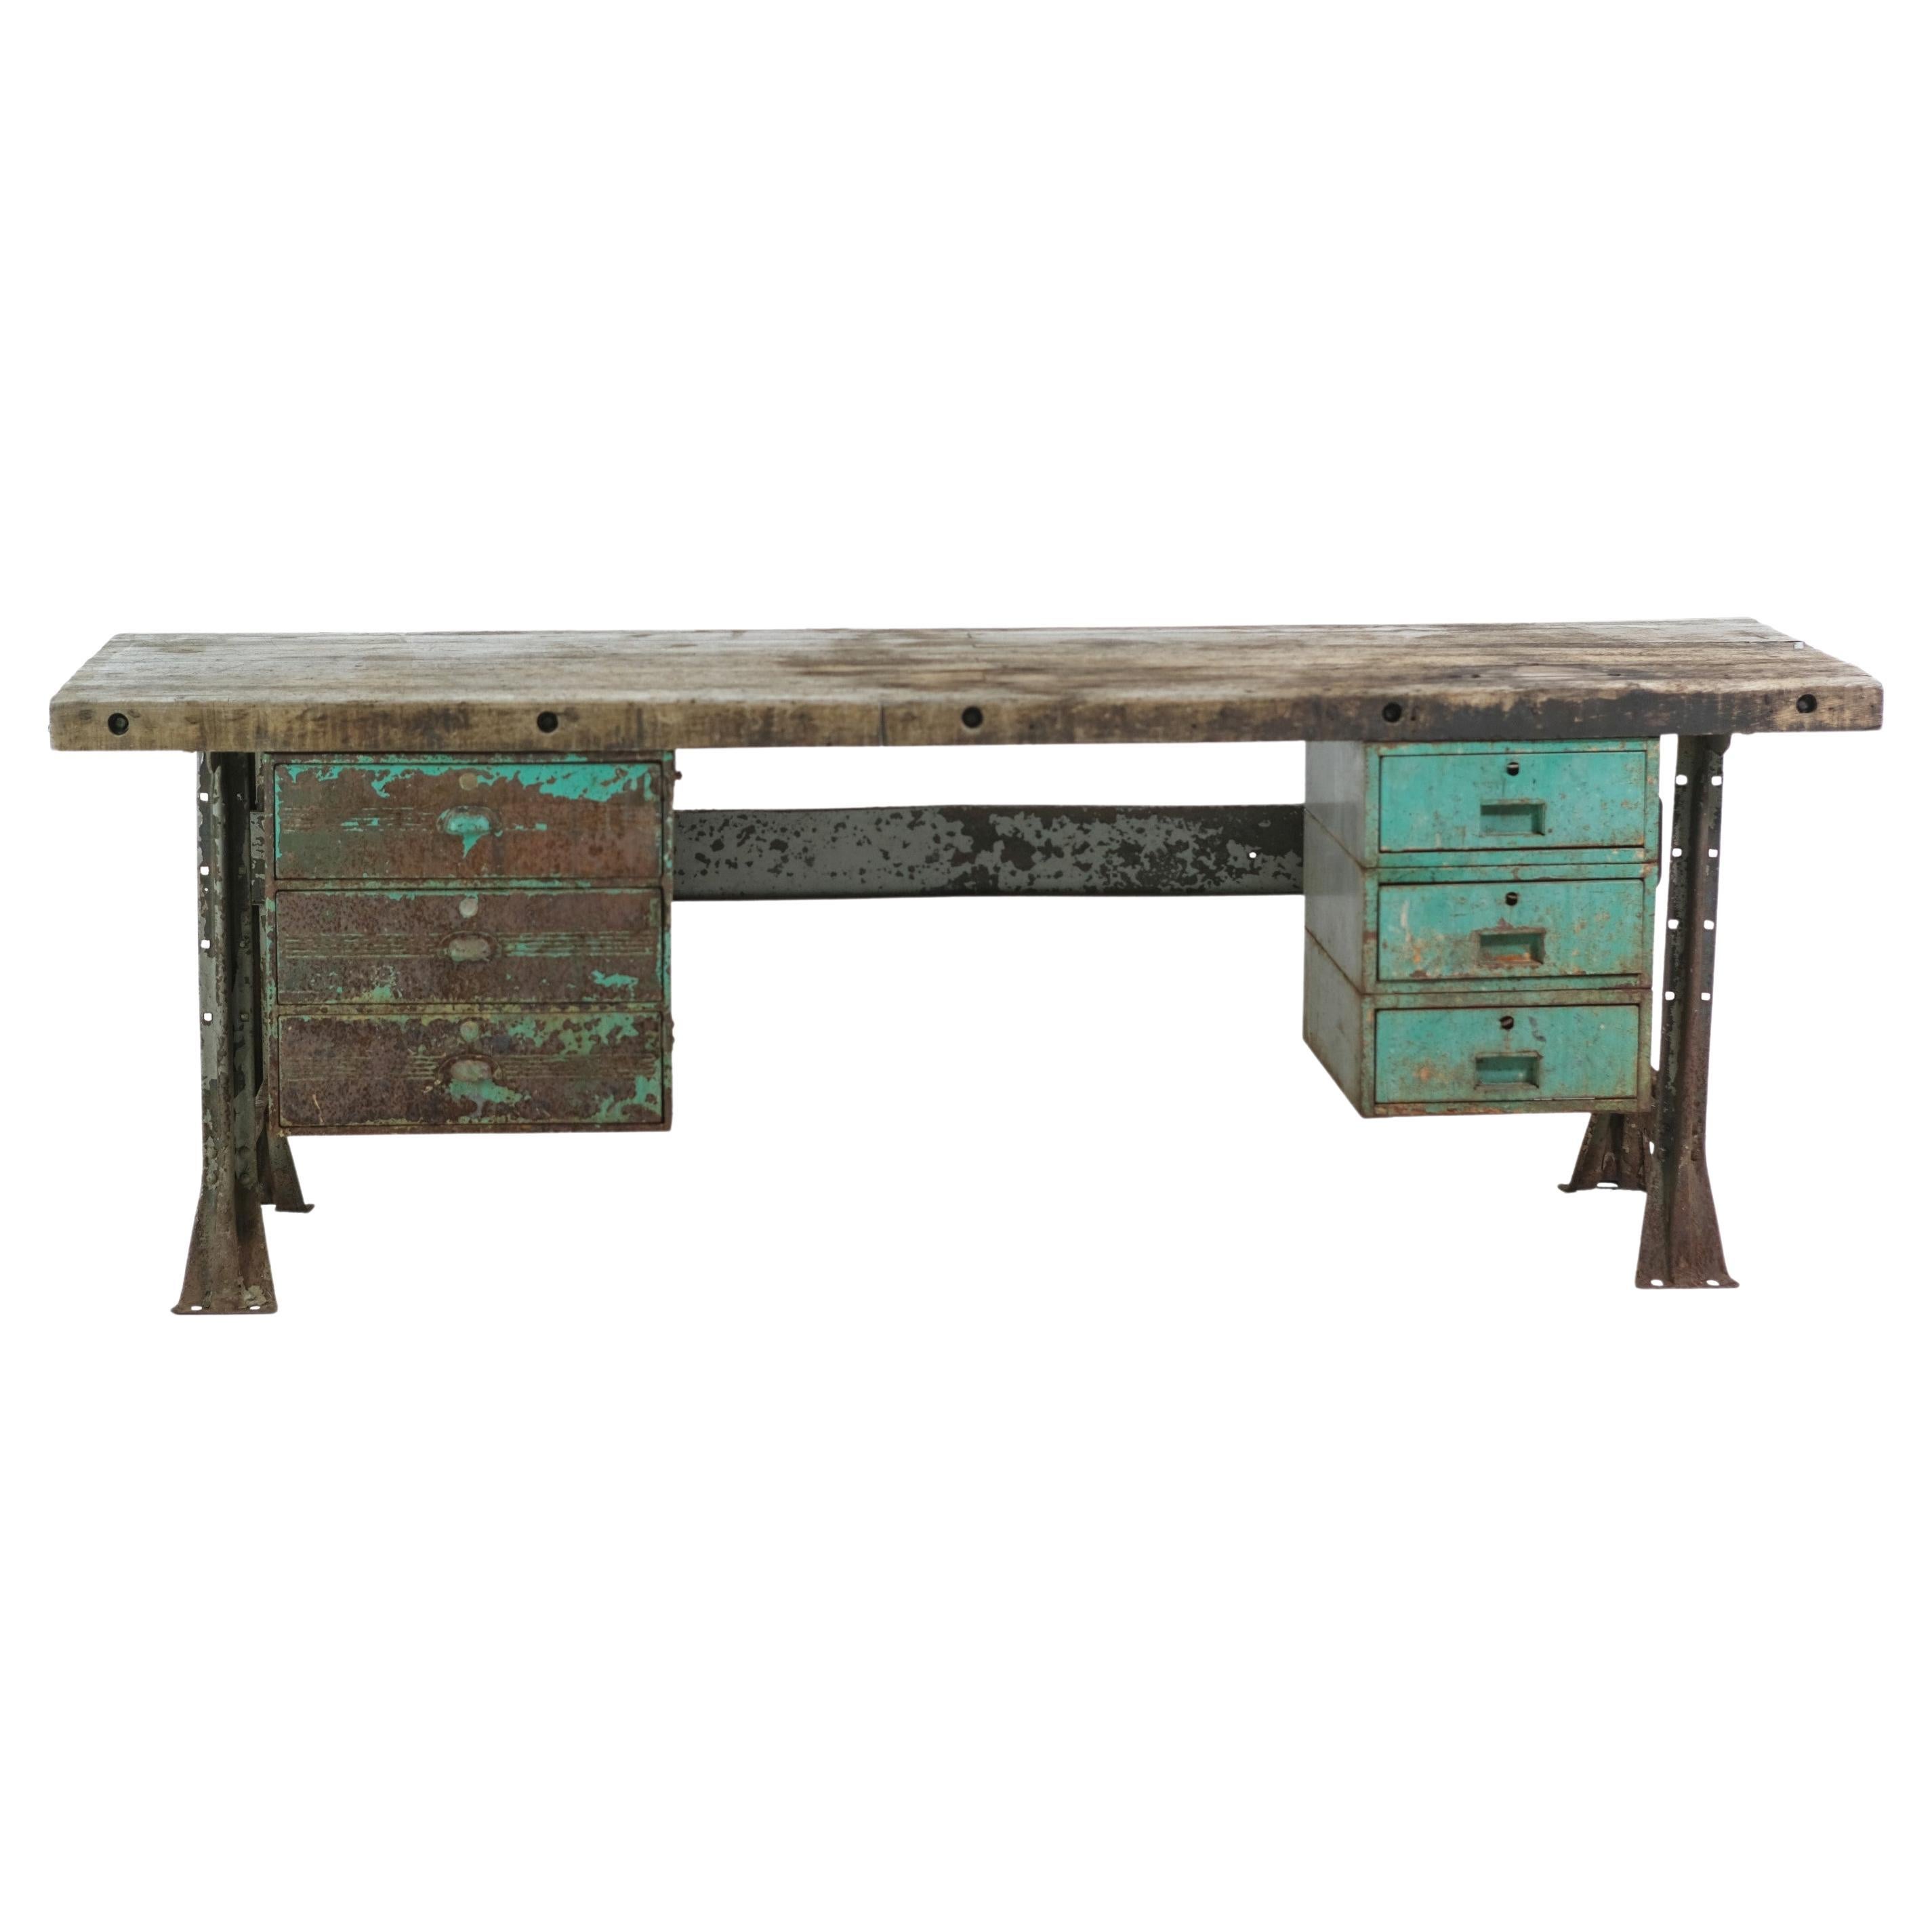 Industrial Pine Top Work Table with Steel Base + 6 Drawers